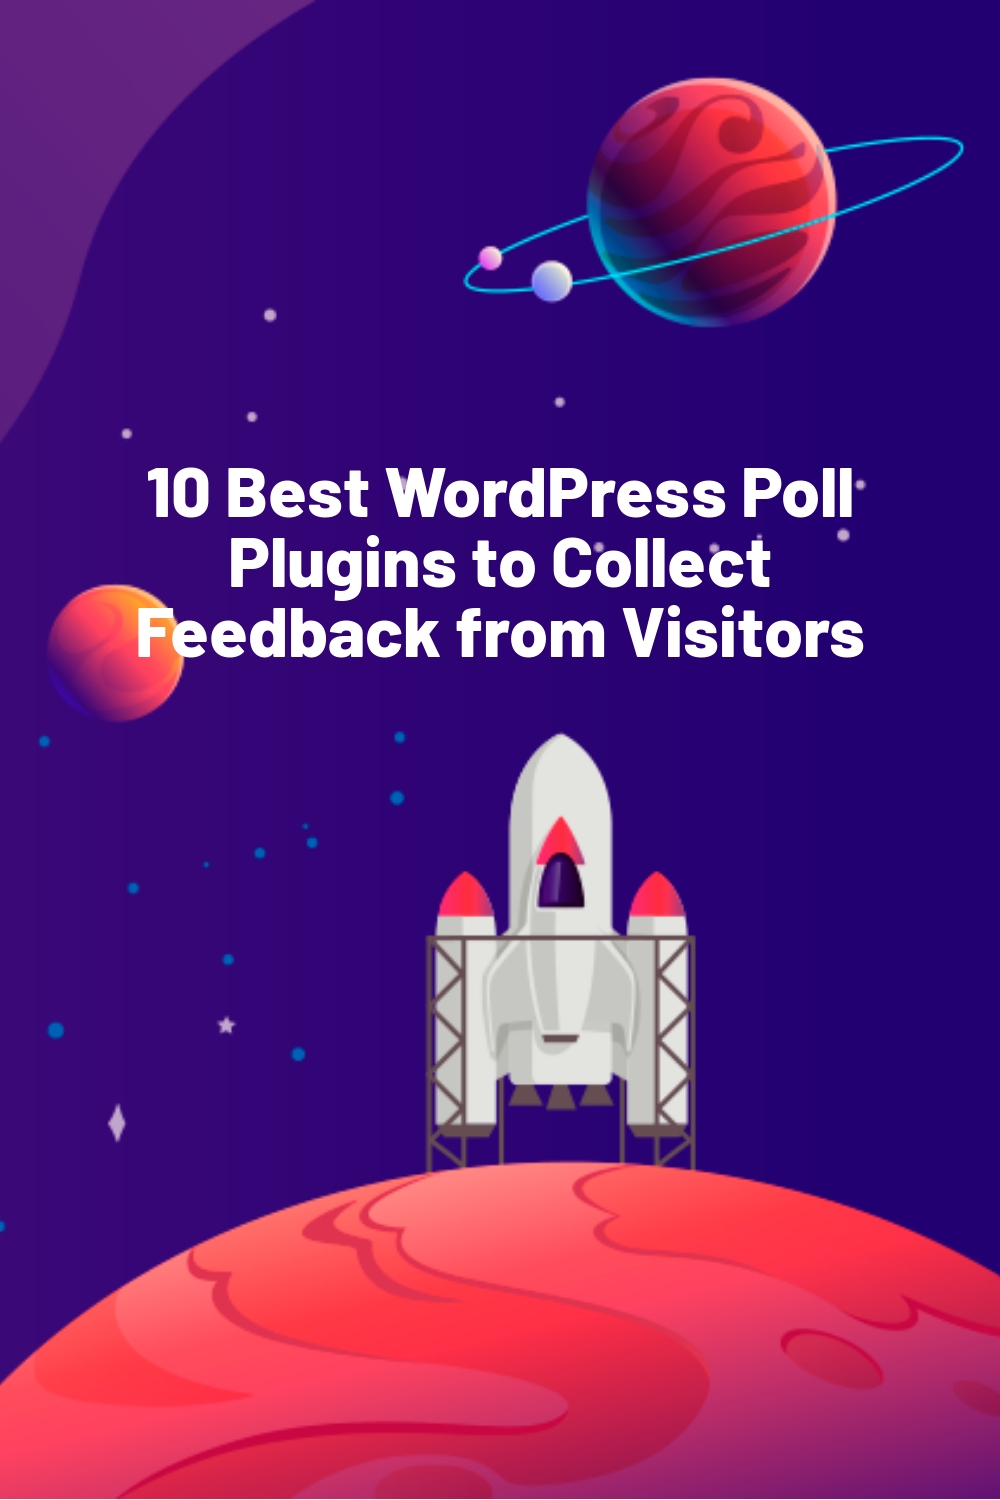 10 Best WordPress Poll Plugins to Collect Feedback from Visitors